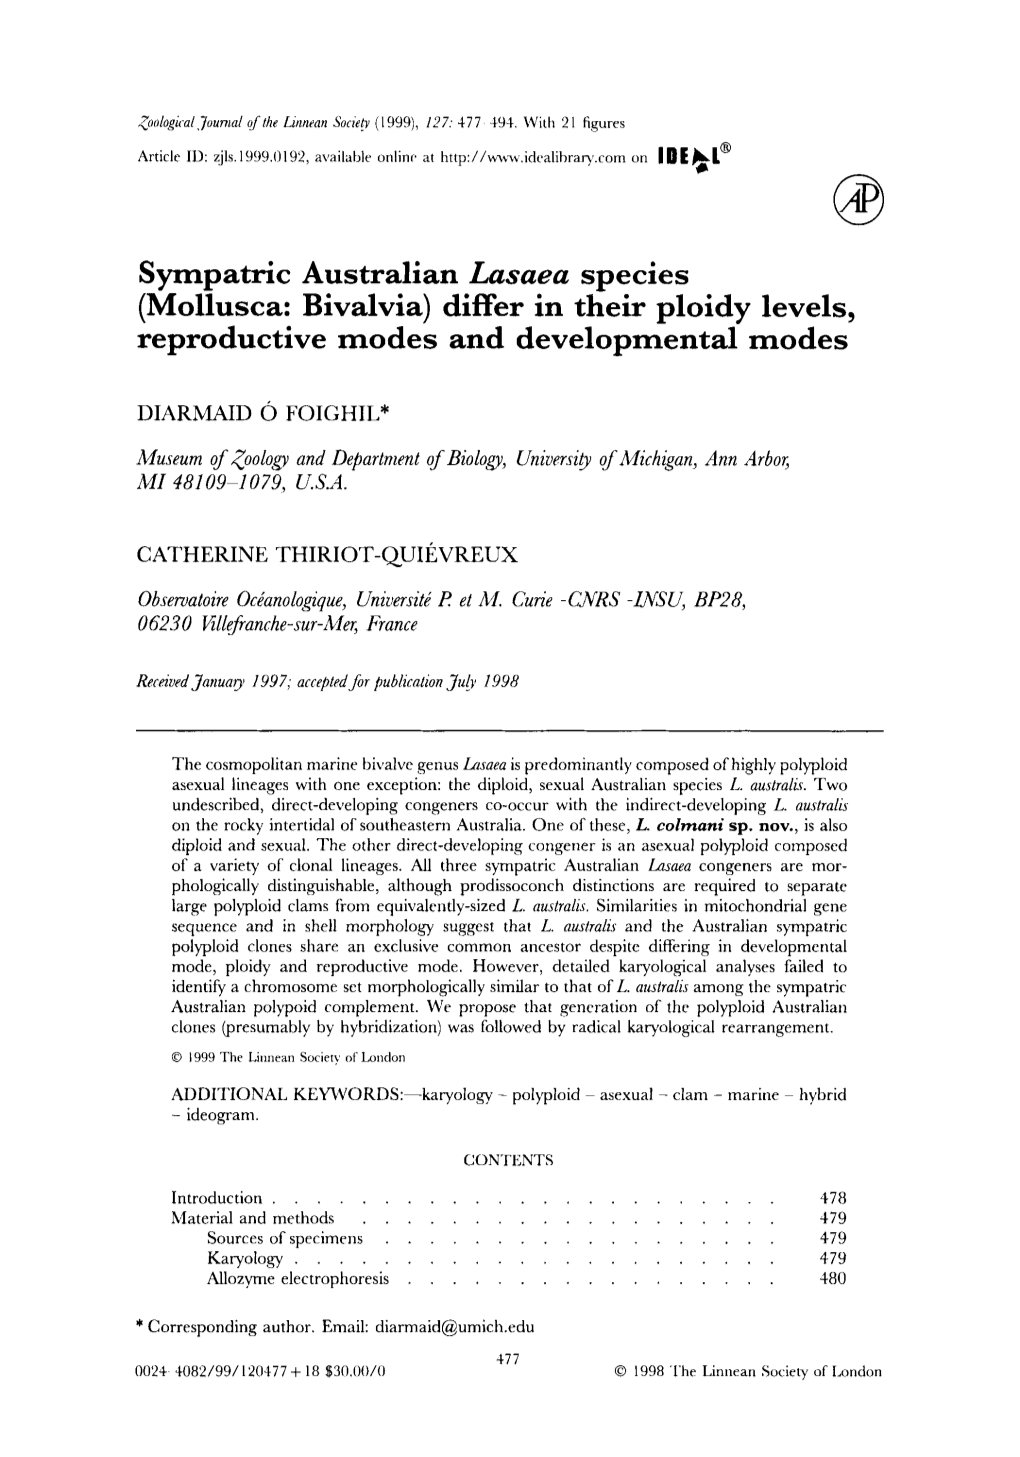 Sympatric Australian Lasaea Species (Mollusca: Bivalvia) Differ in Their Ploidy Levels, Reproductive Modes and Developmental Modes